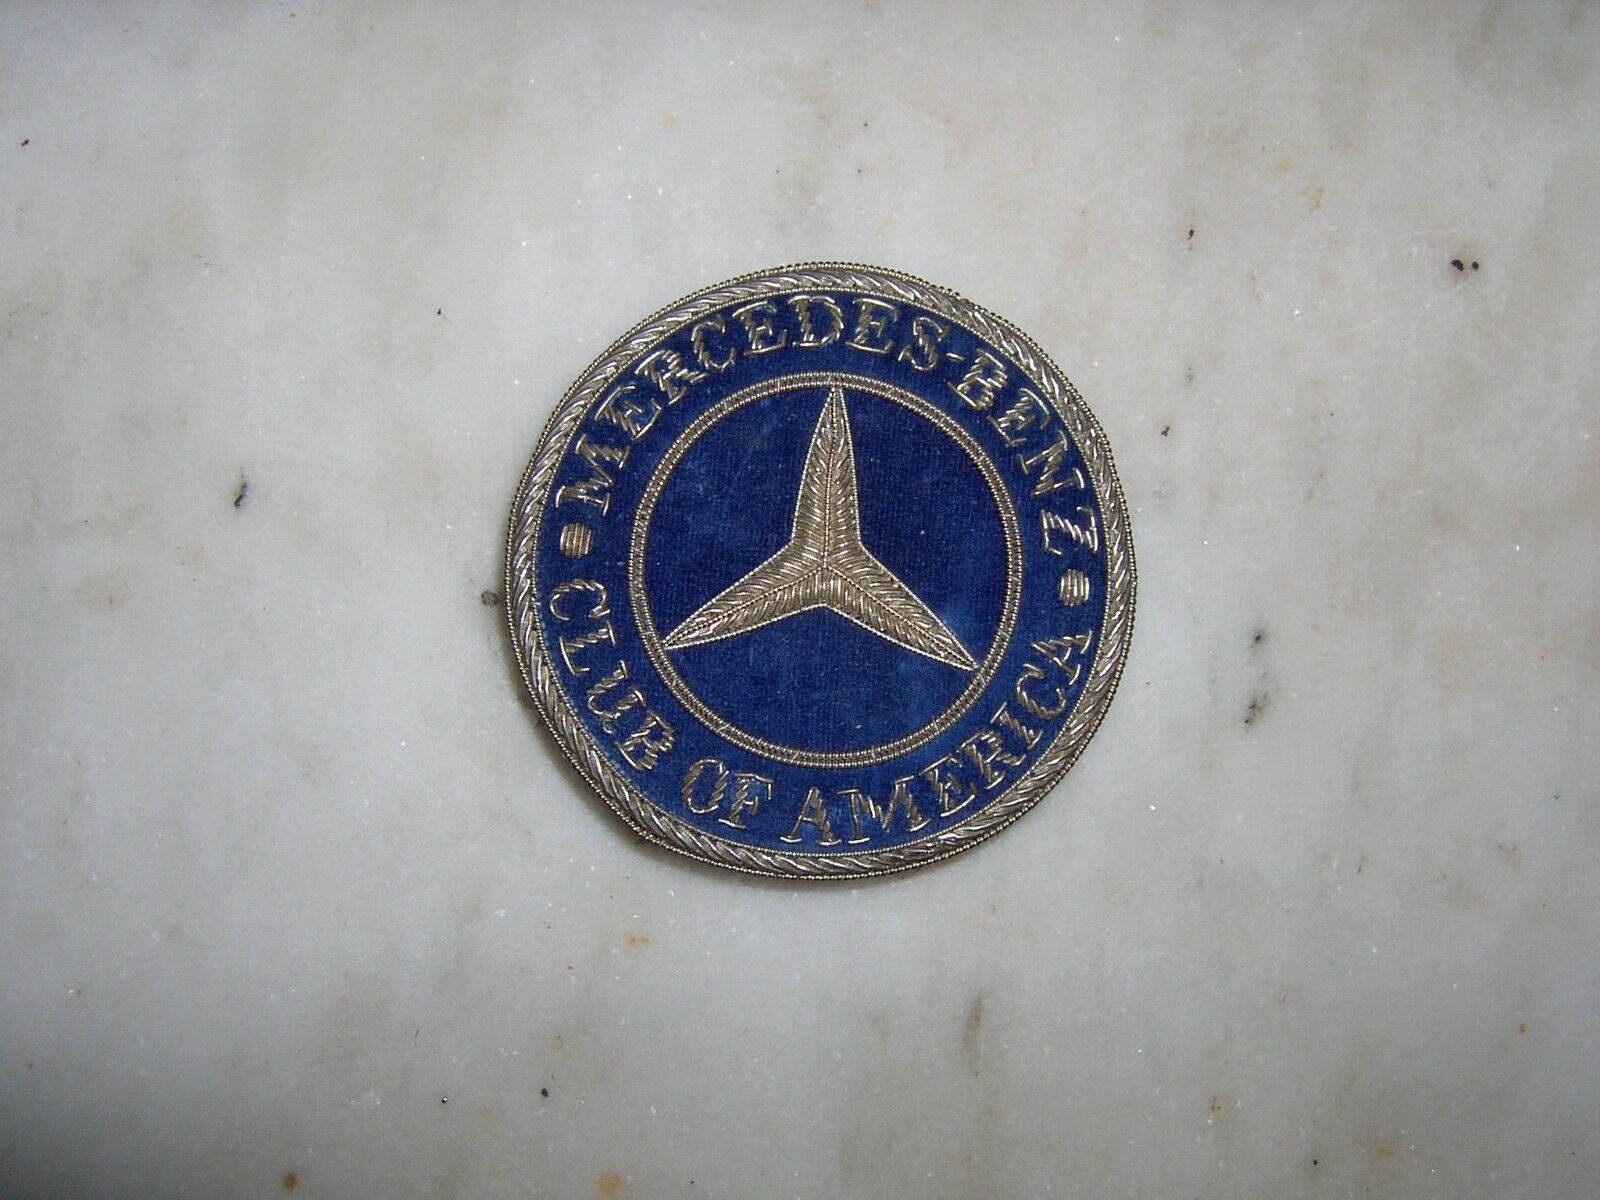 MERCEDES BENZ CLUB OF AMERICA BADGE WITH FELT AND STAINLESS STEEL STITCHING RARE